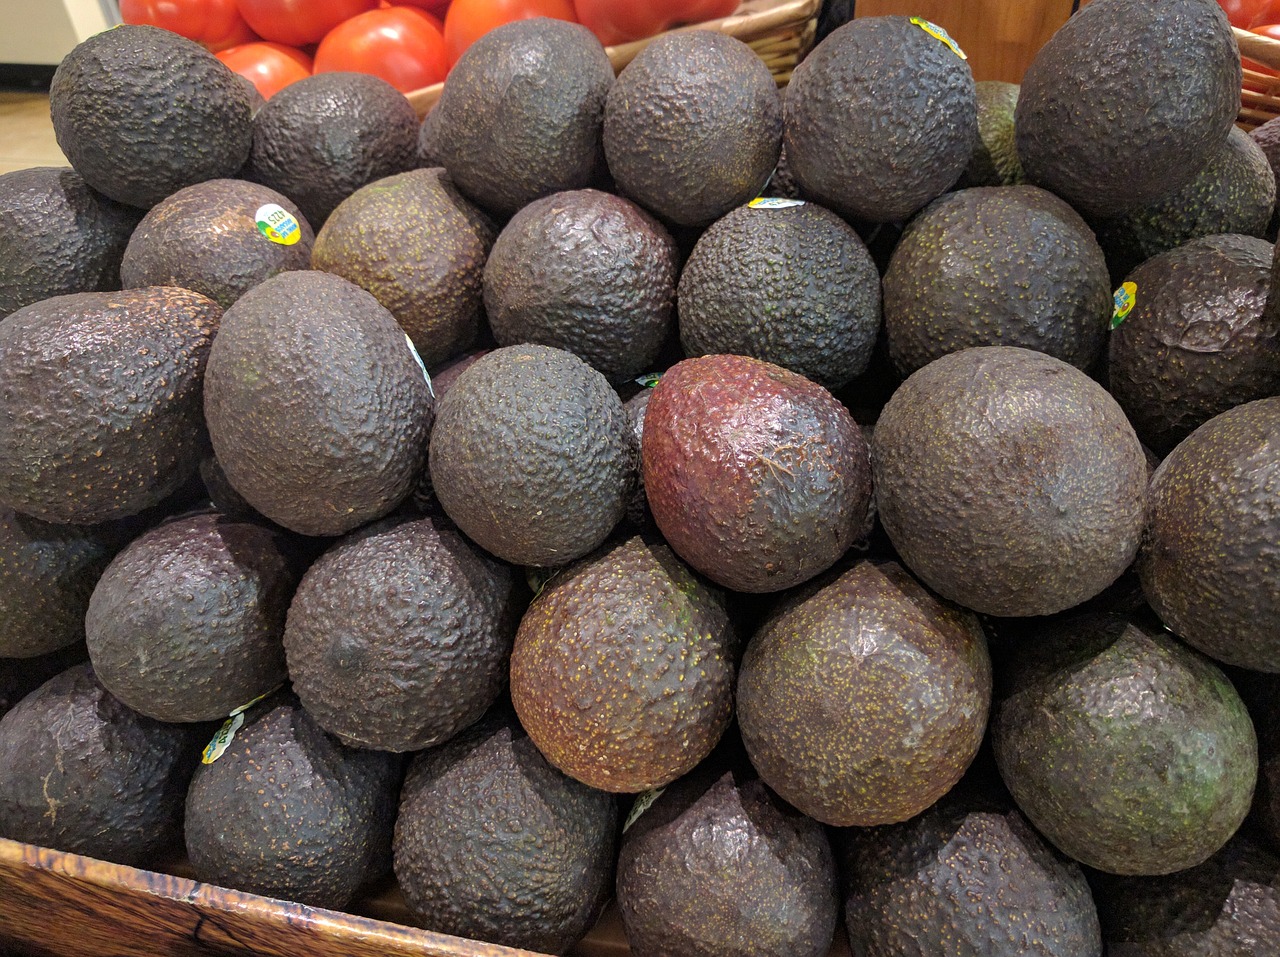 avocados super markets vegetable stand free photo